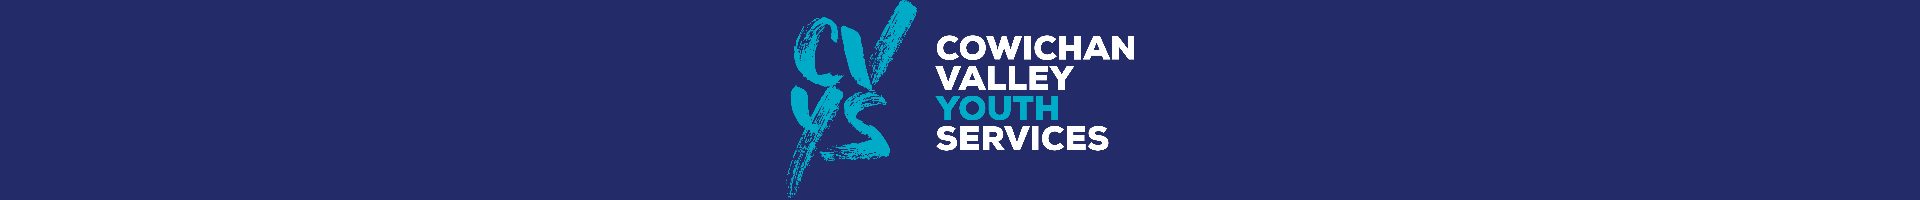 Cowichan Valley Youth Services